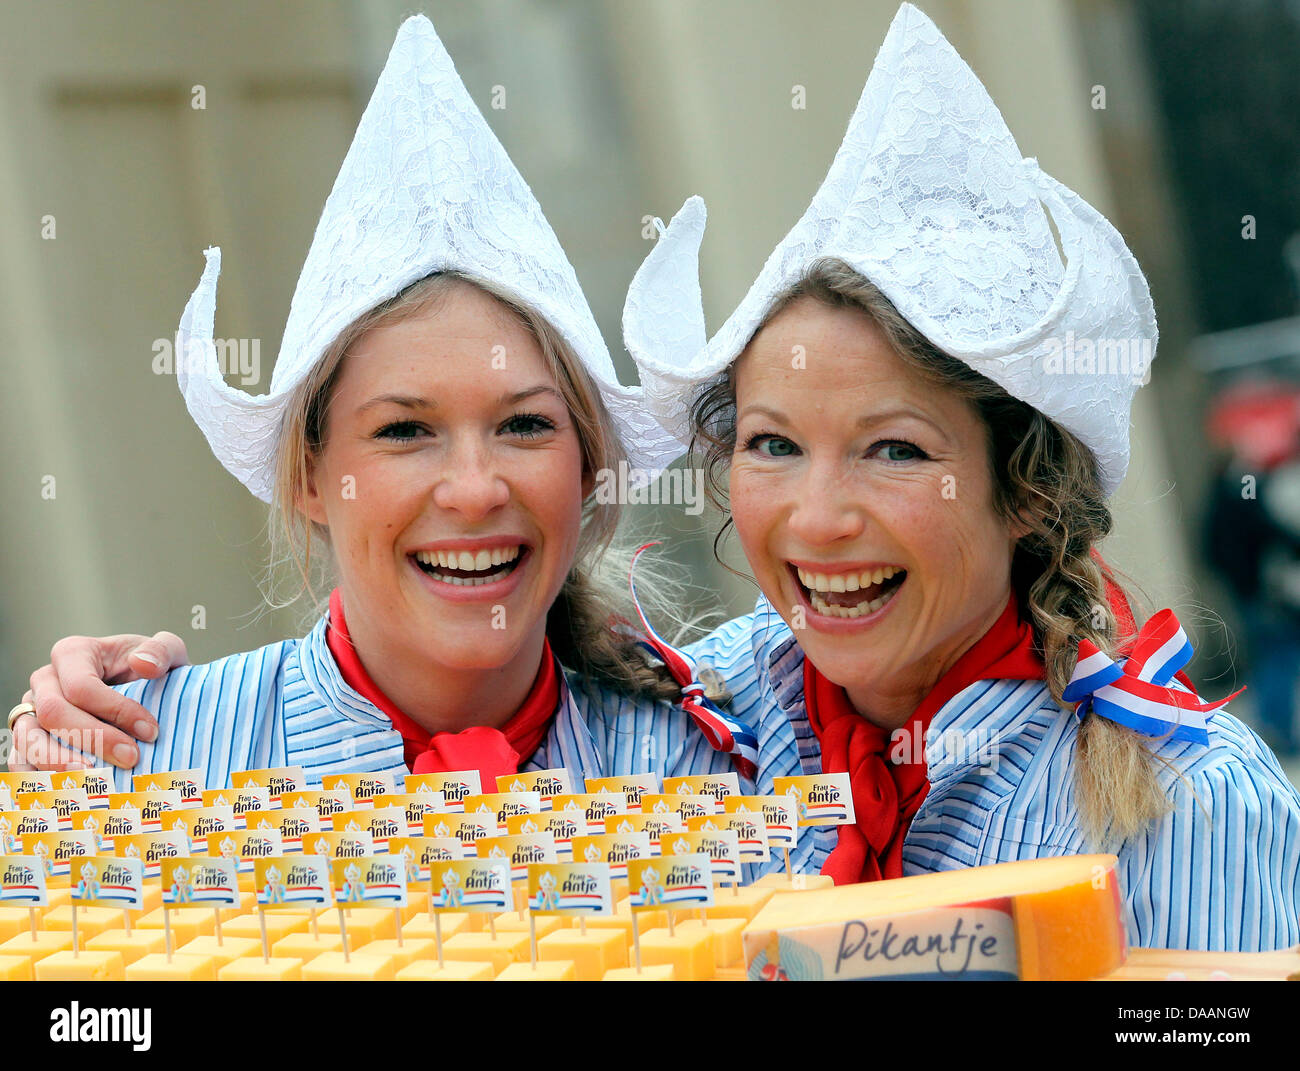 On the occasion of the world's biggest fair for food, agriculture and horticulture, the International Green Week Berlin, Mandy Smits (L) offers fresh Gouda with her predecessor Madeleen Driessen at the Brandenburg Gate in Berlin, Germany, 20 January 2011. The two women are impersonators of the advertising character 'Ms Antje', representing Dutch dairy. The Green Week last from 21 u Stock Photo